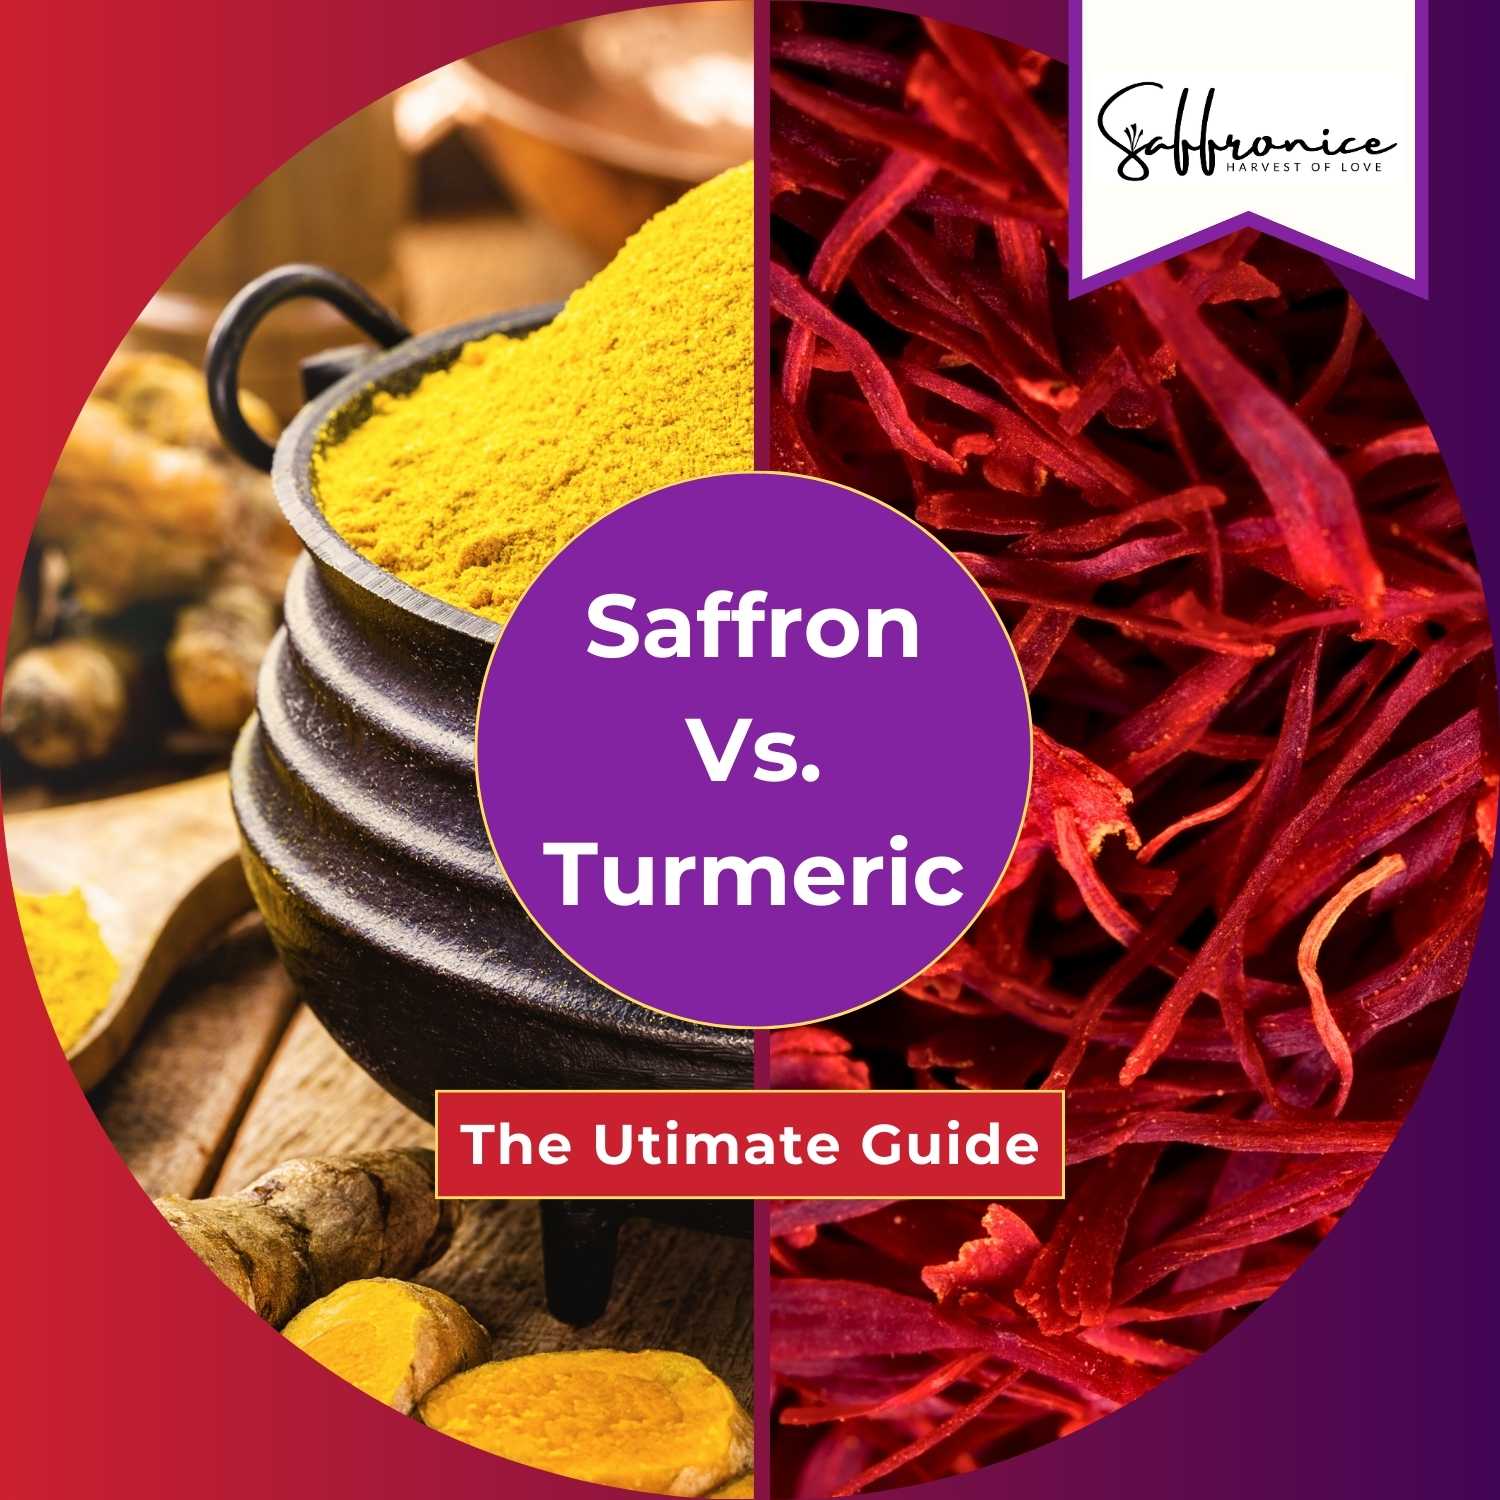 turmeric powder and whole and saffron threads